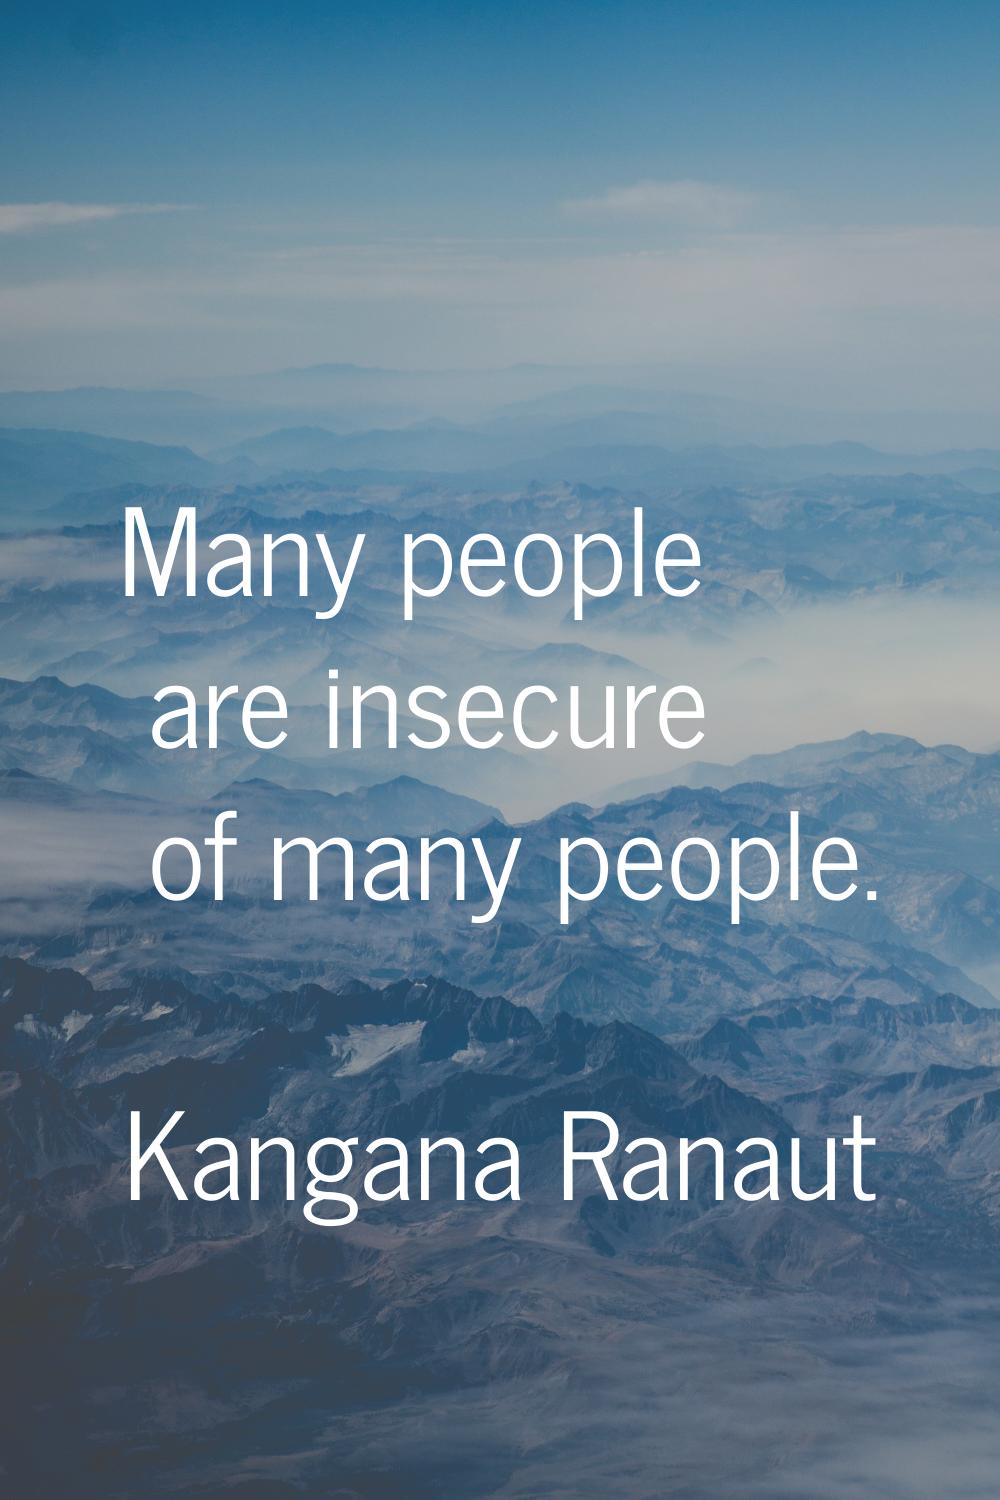 Many people are insecure of many people.